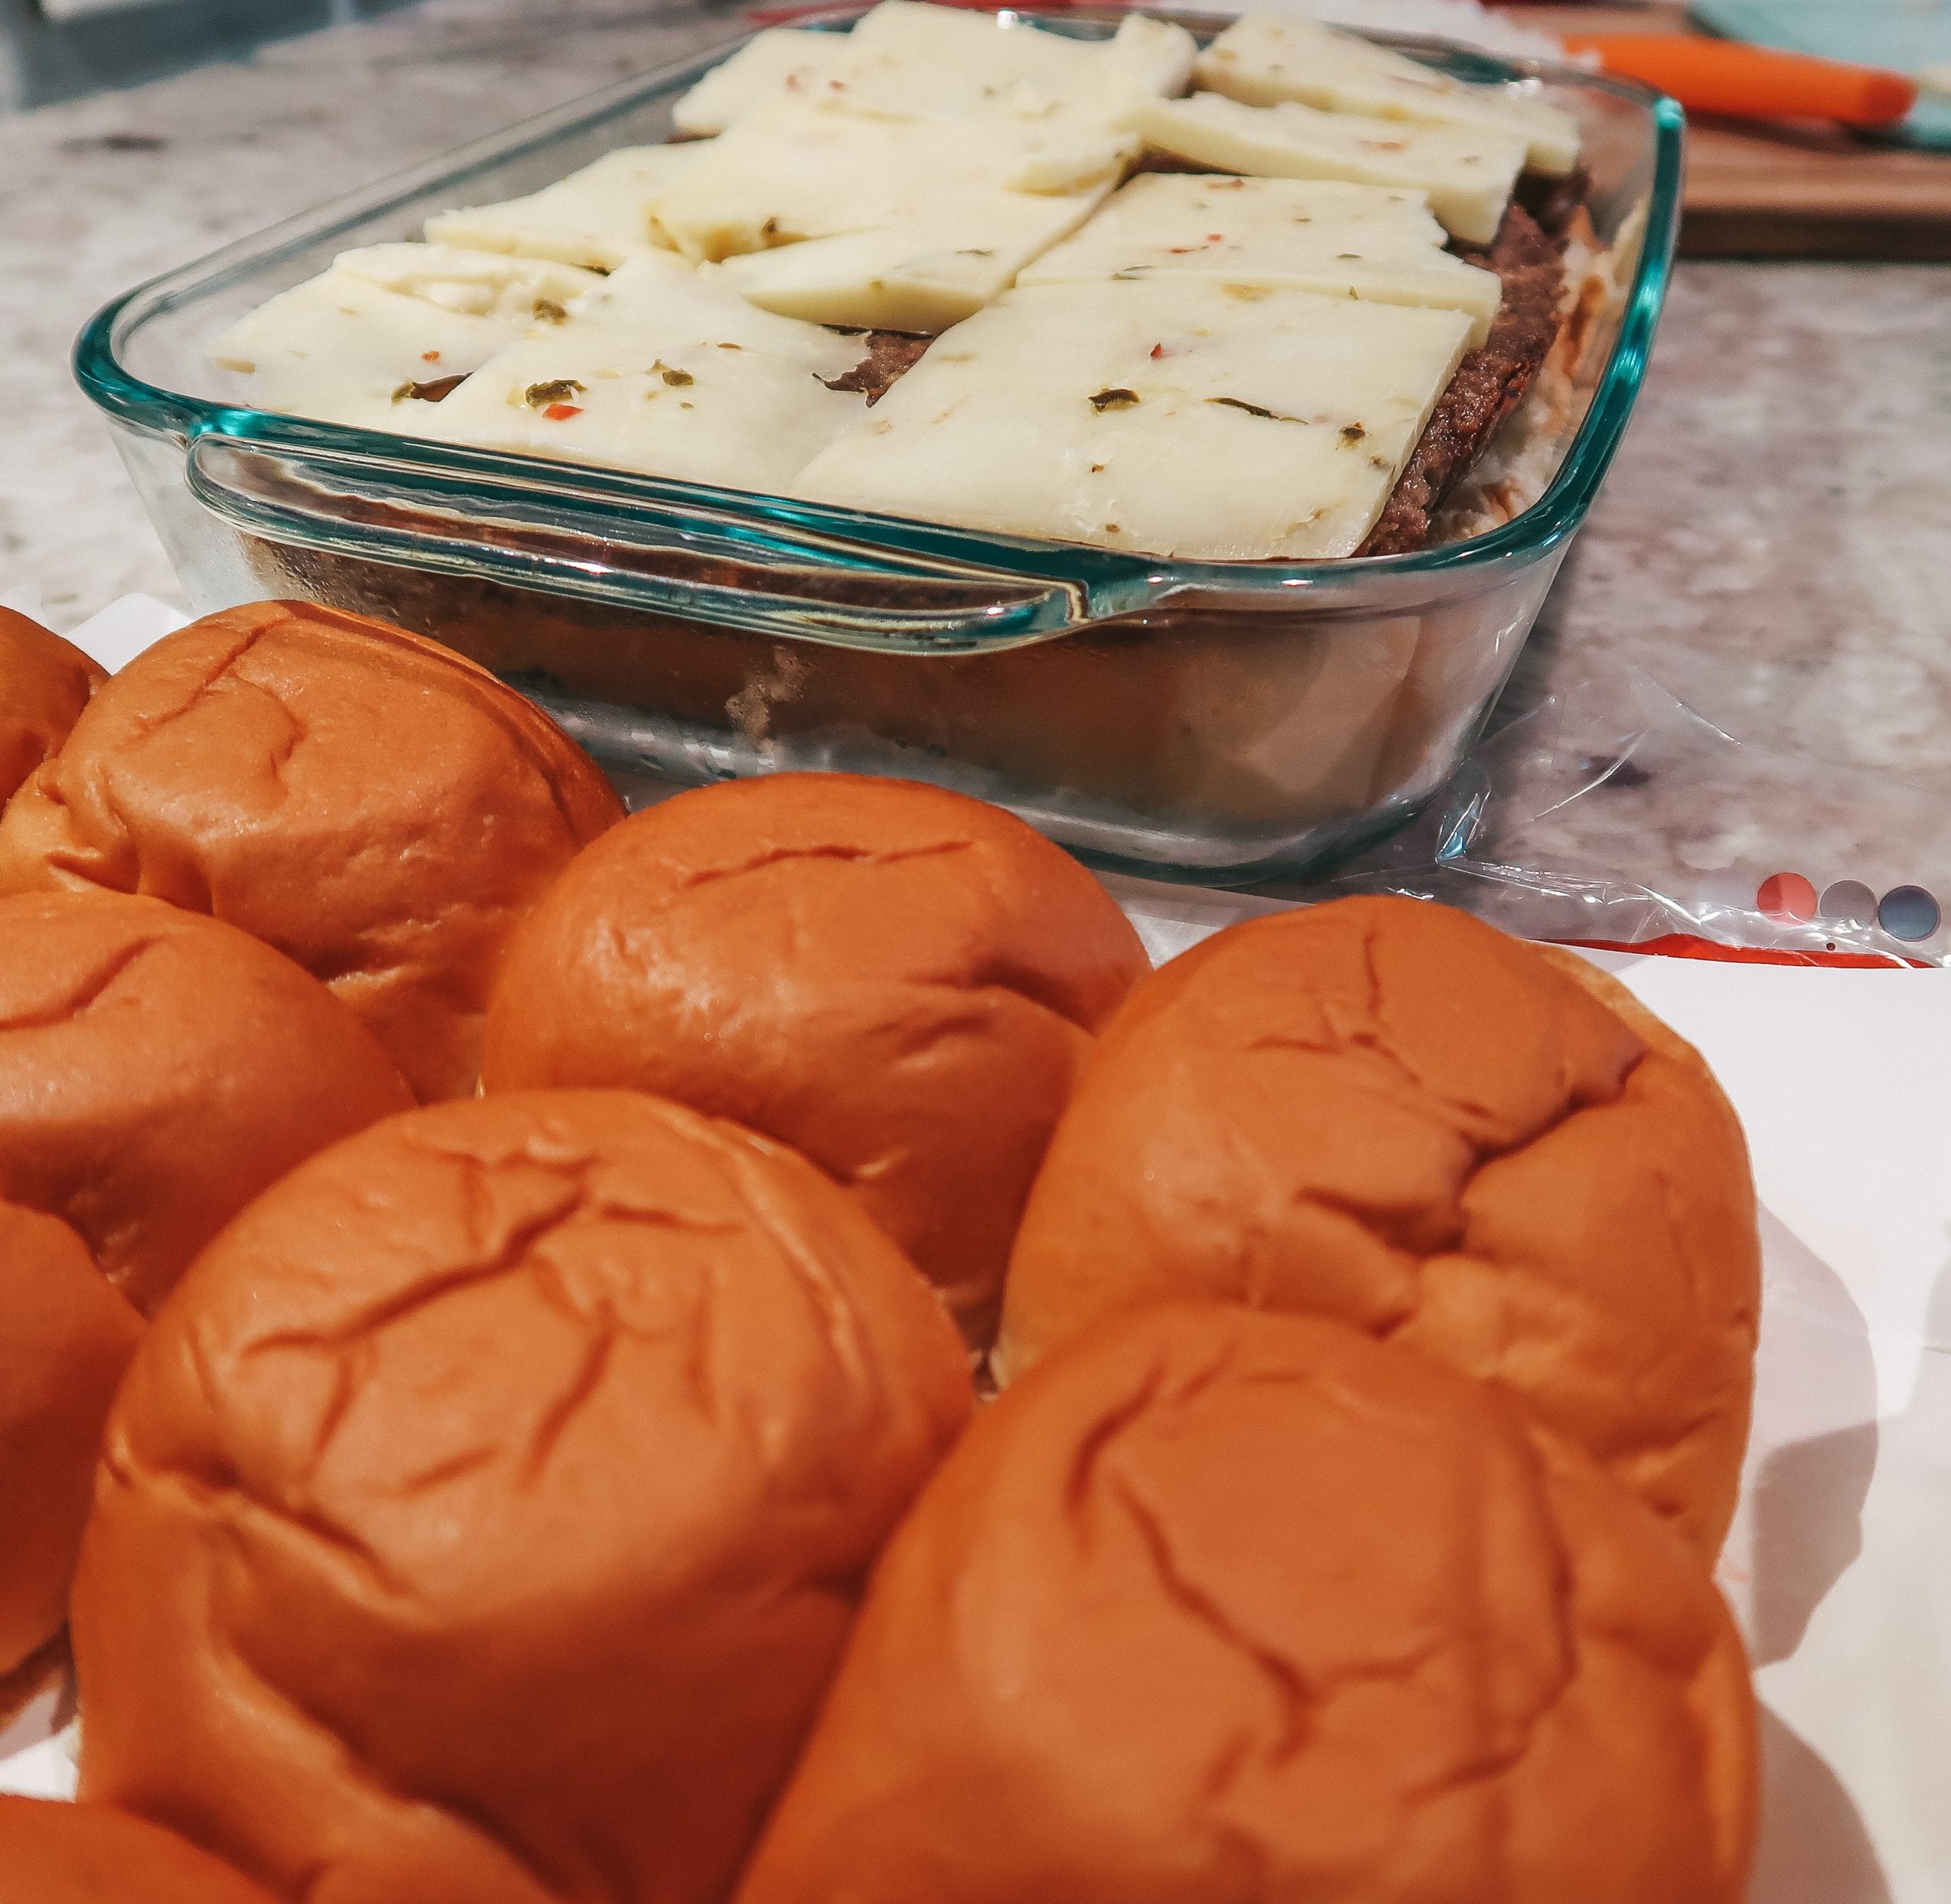 assembling the sliders. adding cheese